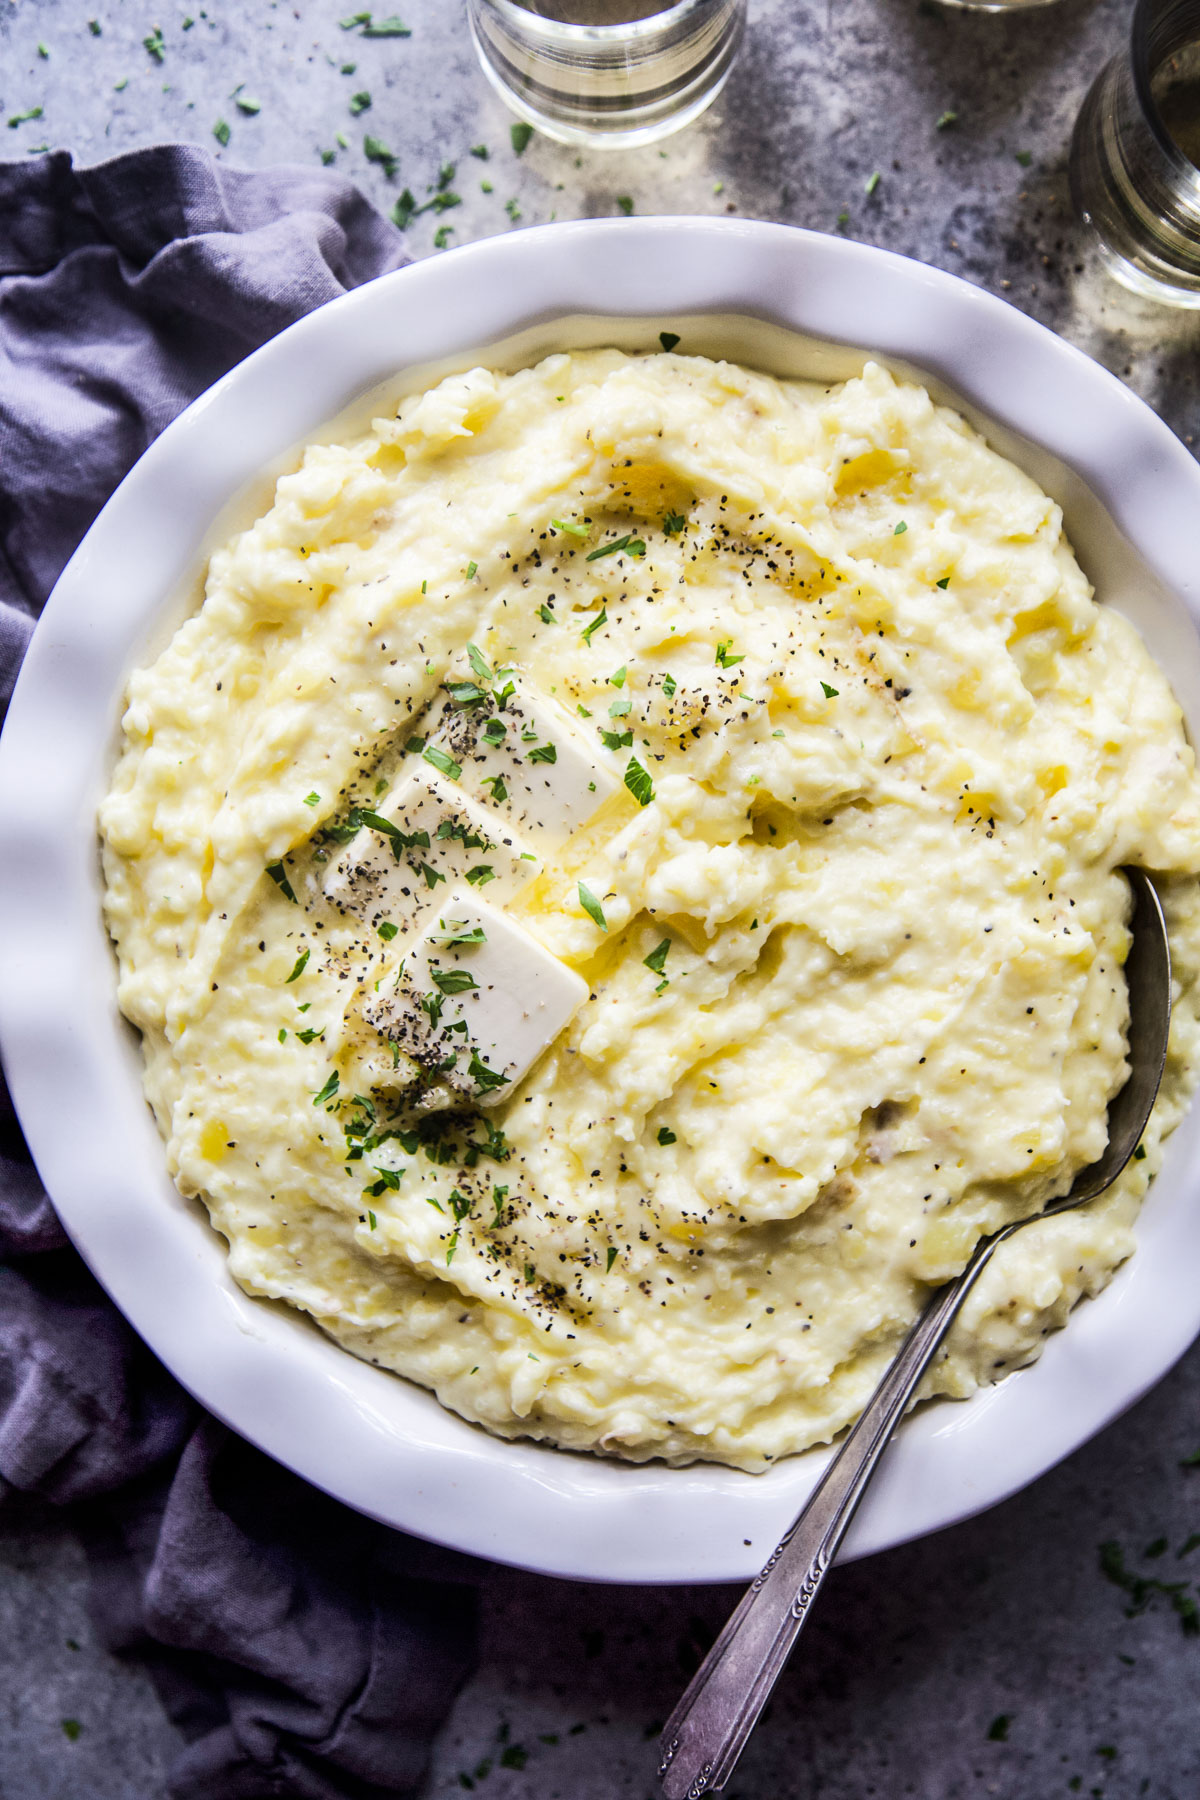 https://thecuriousplate.com/wp-content/uploads/2022/10/ultimate-classic-mashed-potatoes-www.thecuriousplate.com-1.jpg